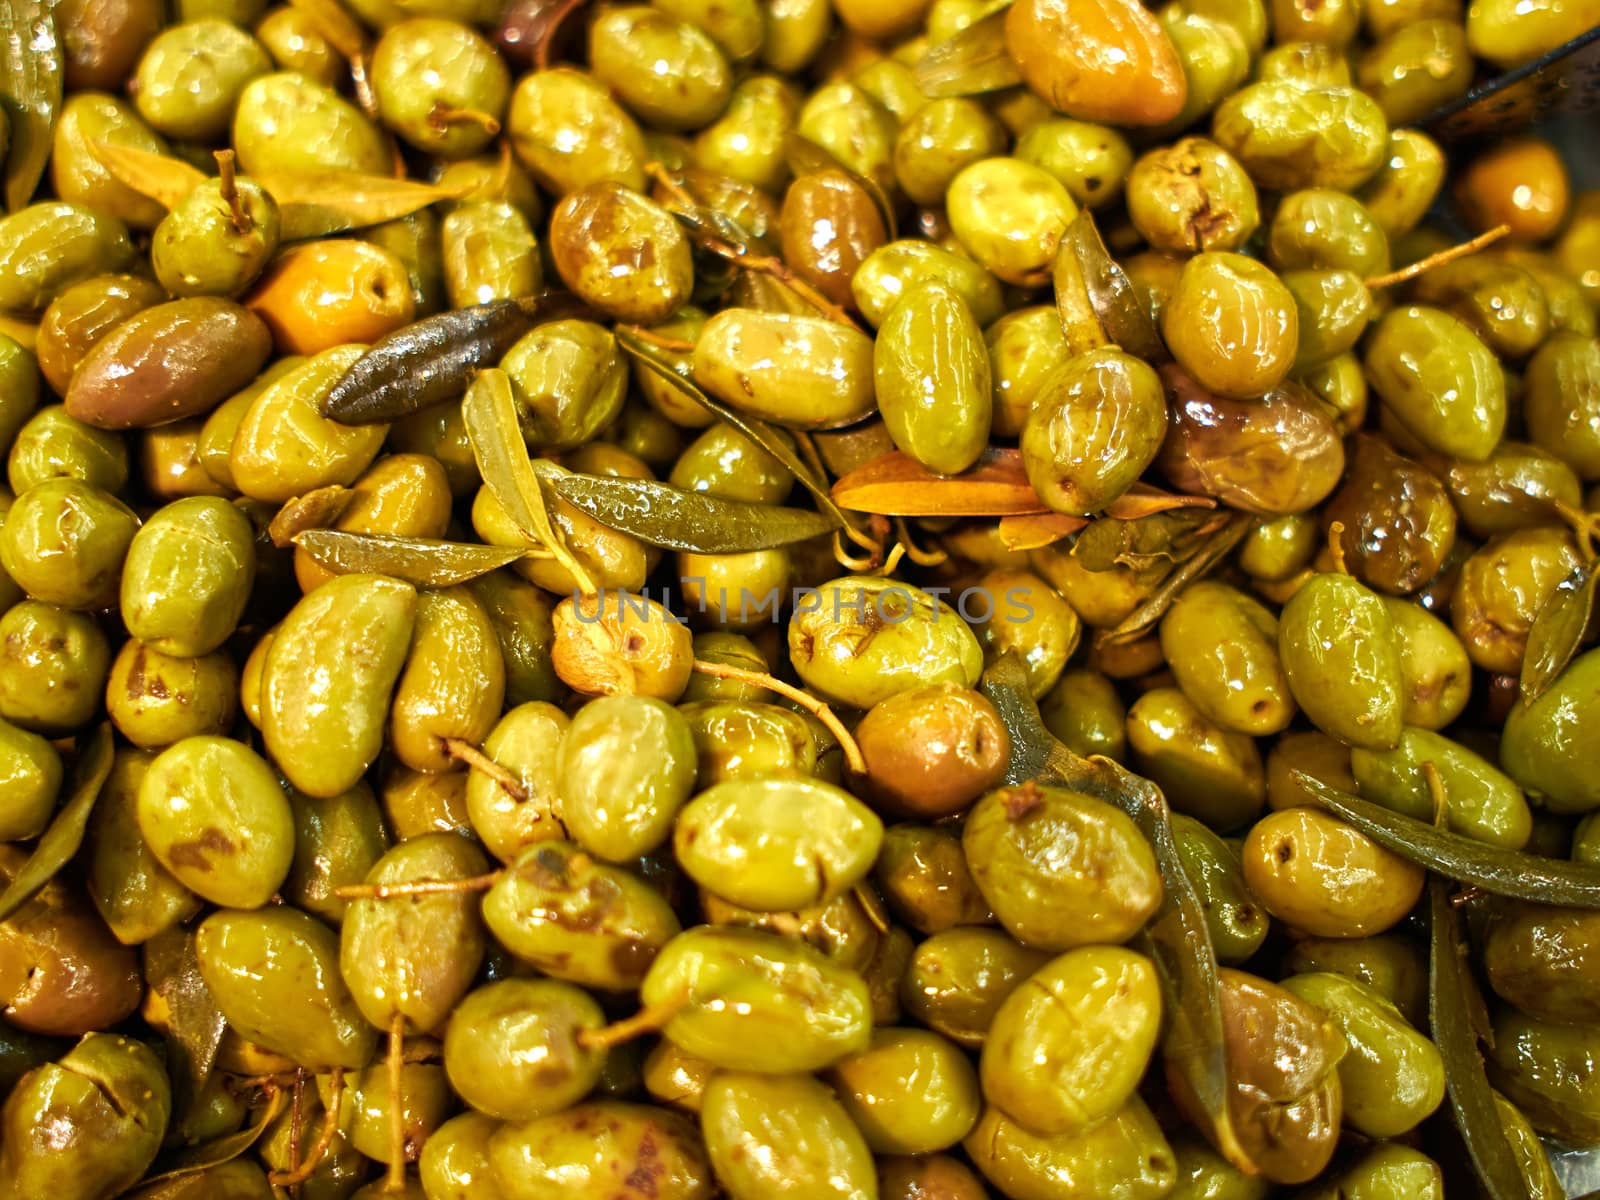 Tradtional pickled Mediterranean style green olives for sale in a market shop